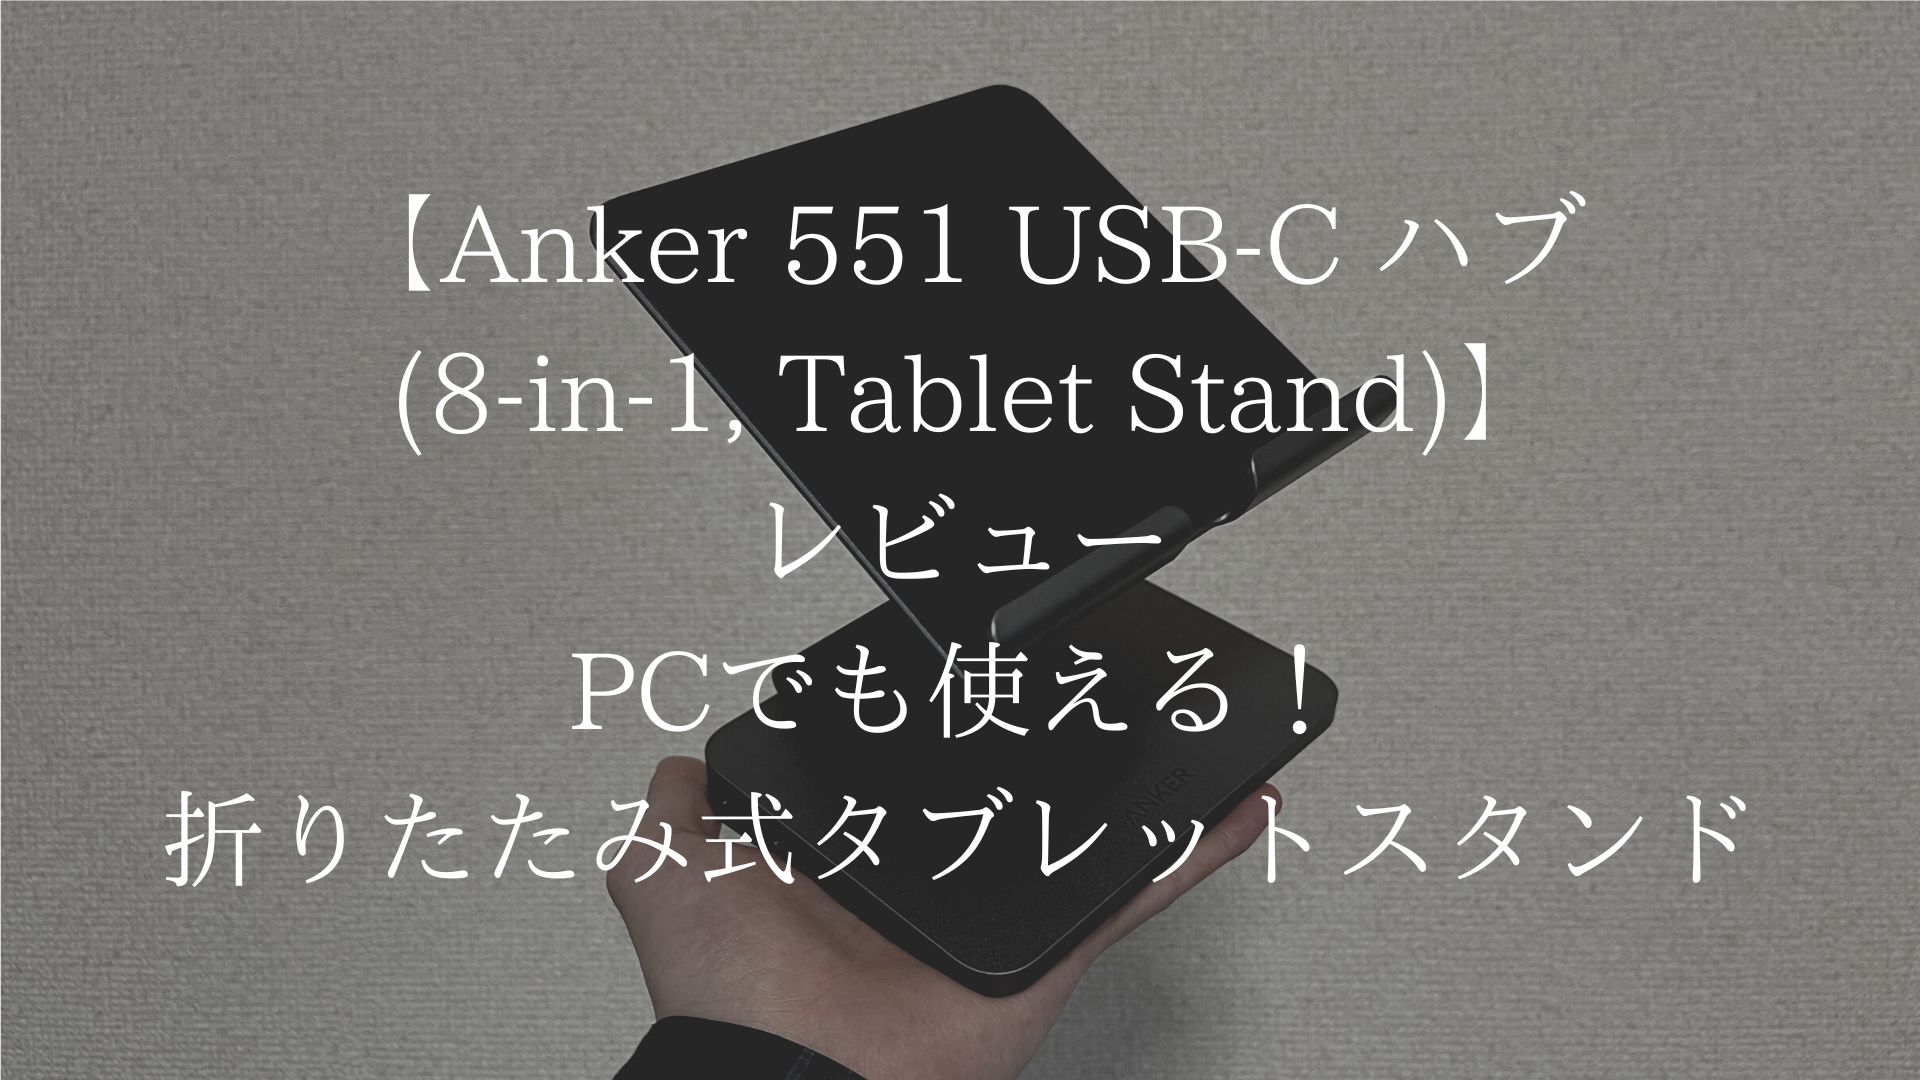 Anker 551 USB-C ハブ (8-in-1, Tablet Stand)のアイキャッチ画像